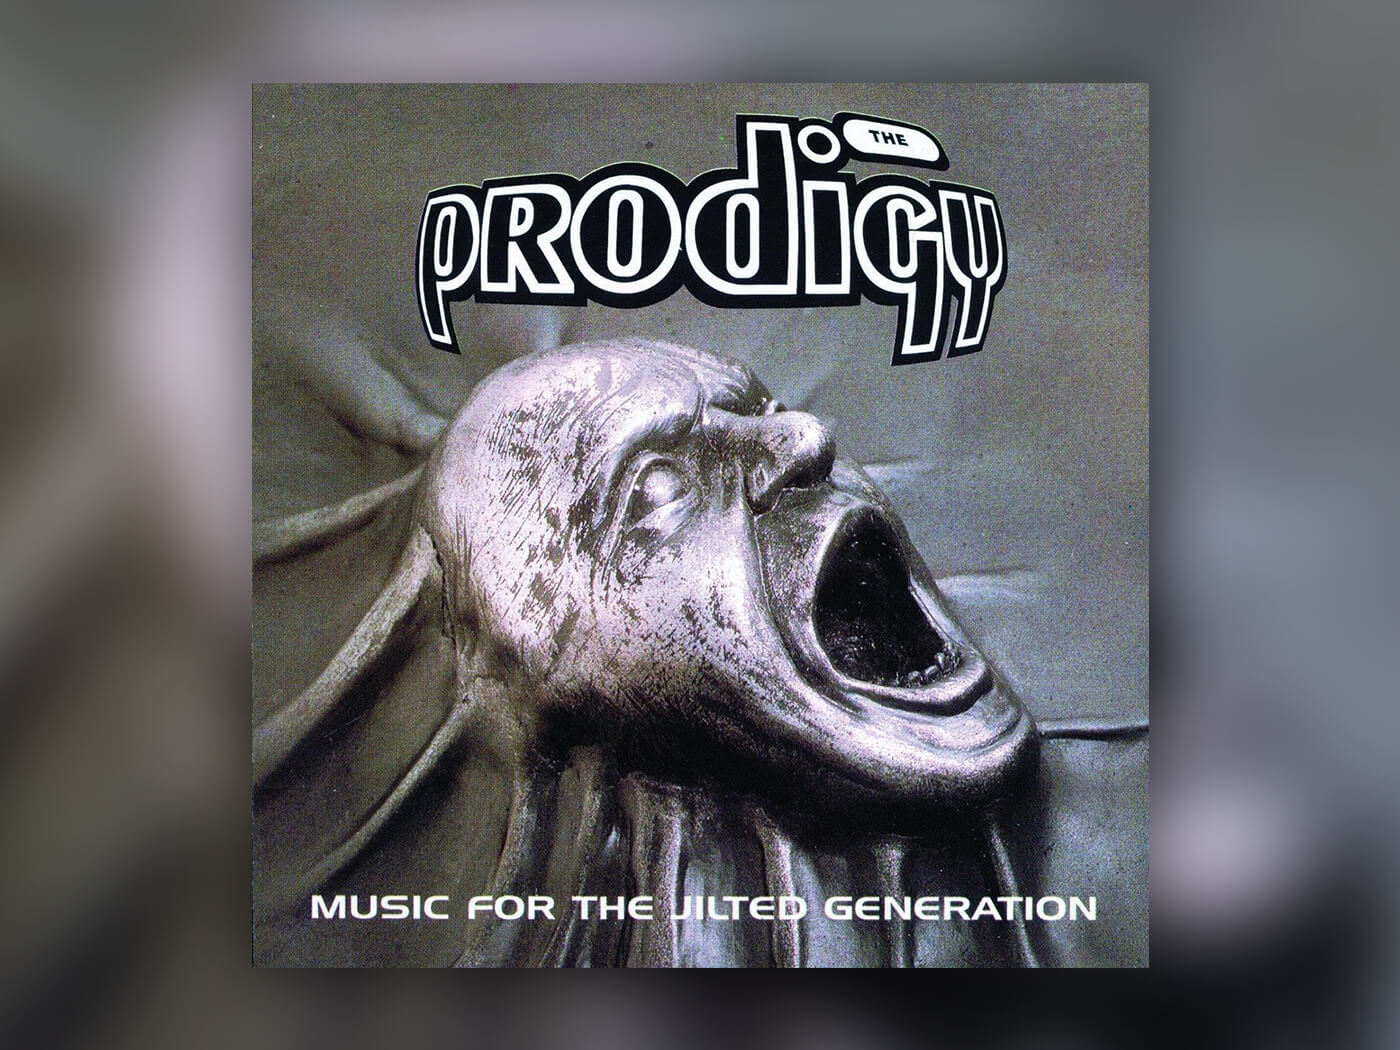 Album art from The Prodigy's Music For The Jilted Generation